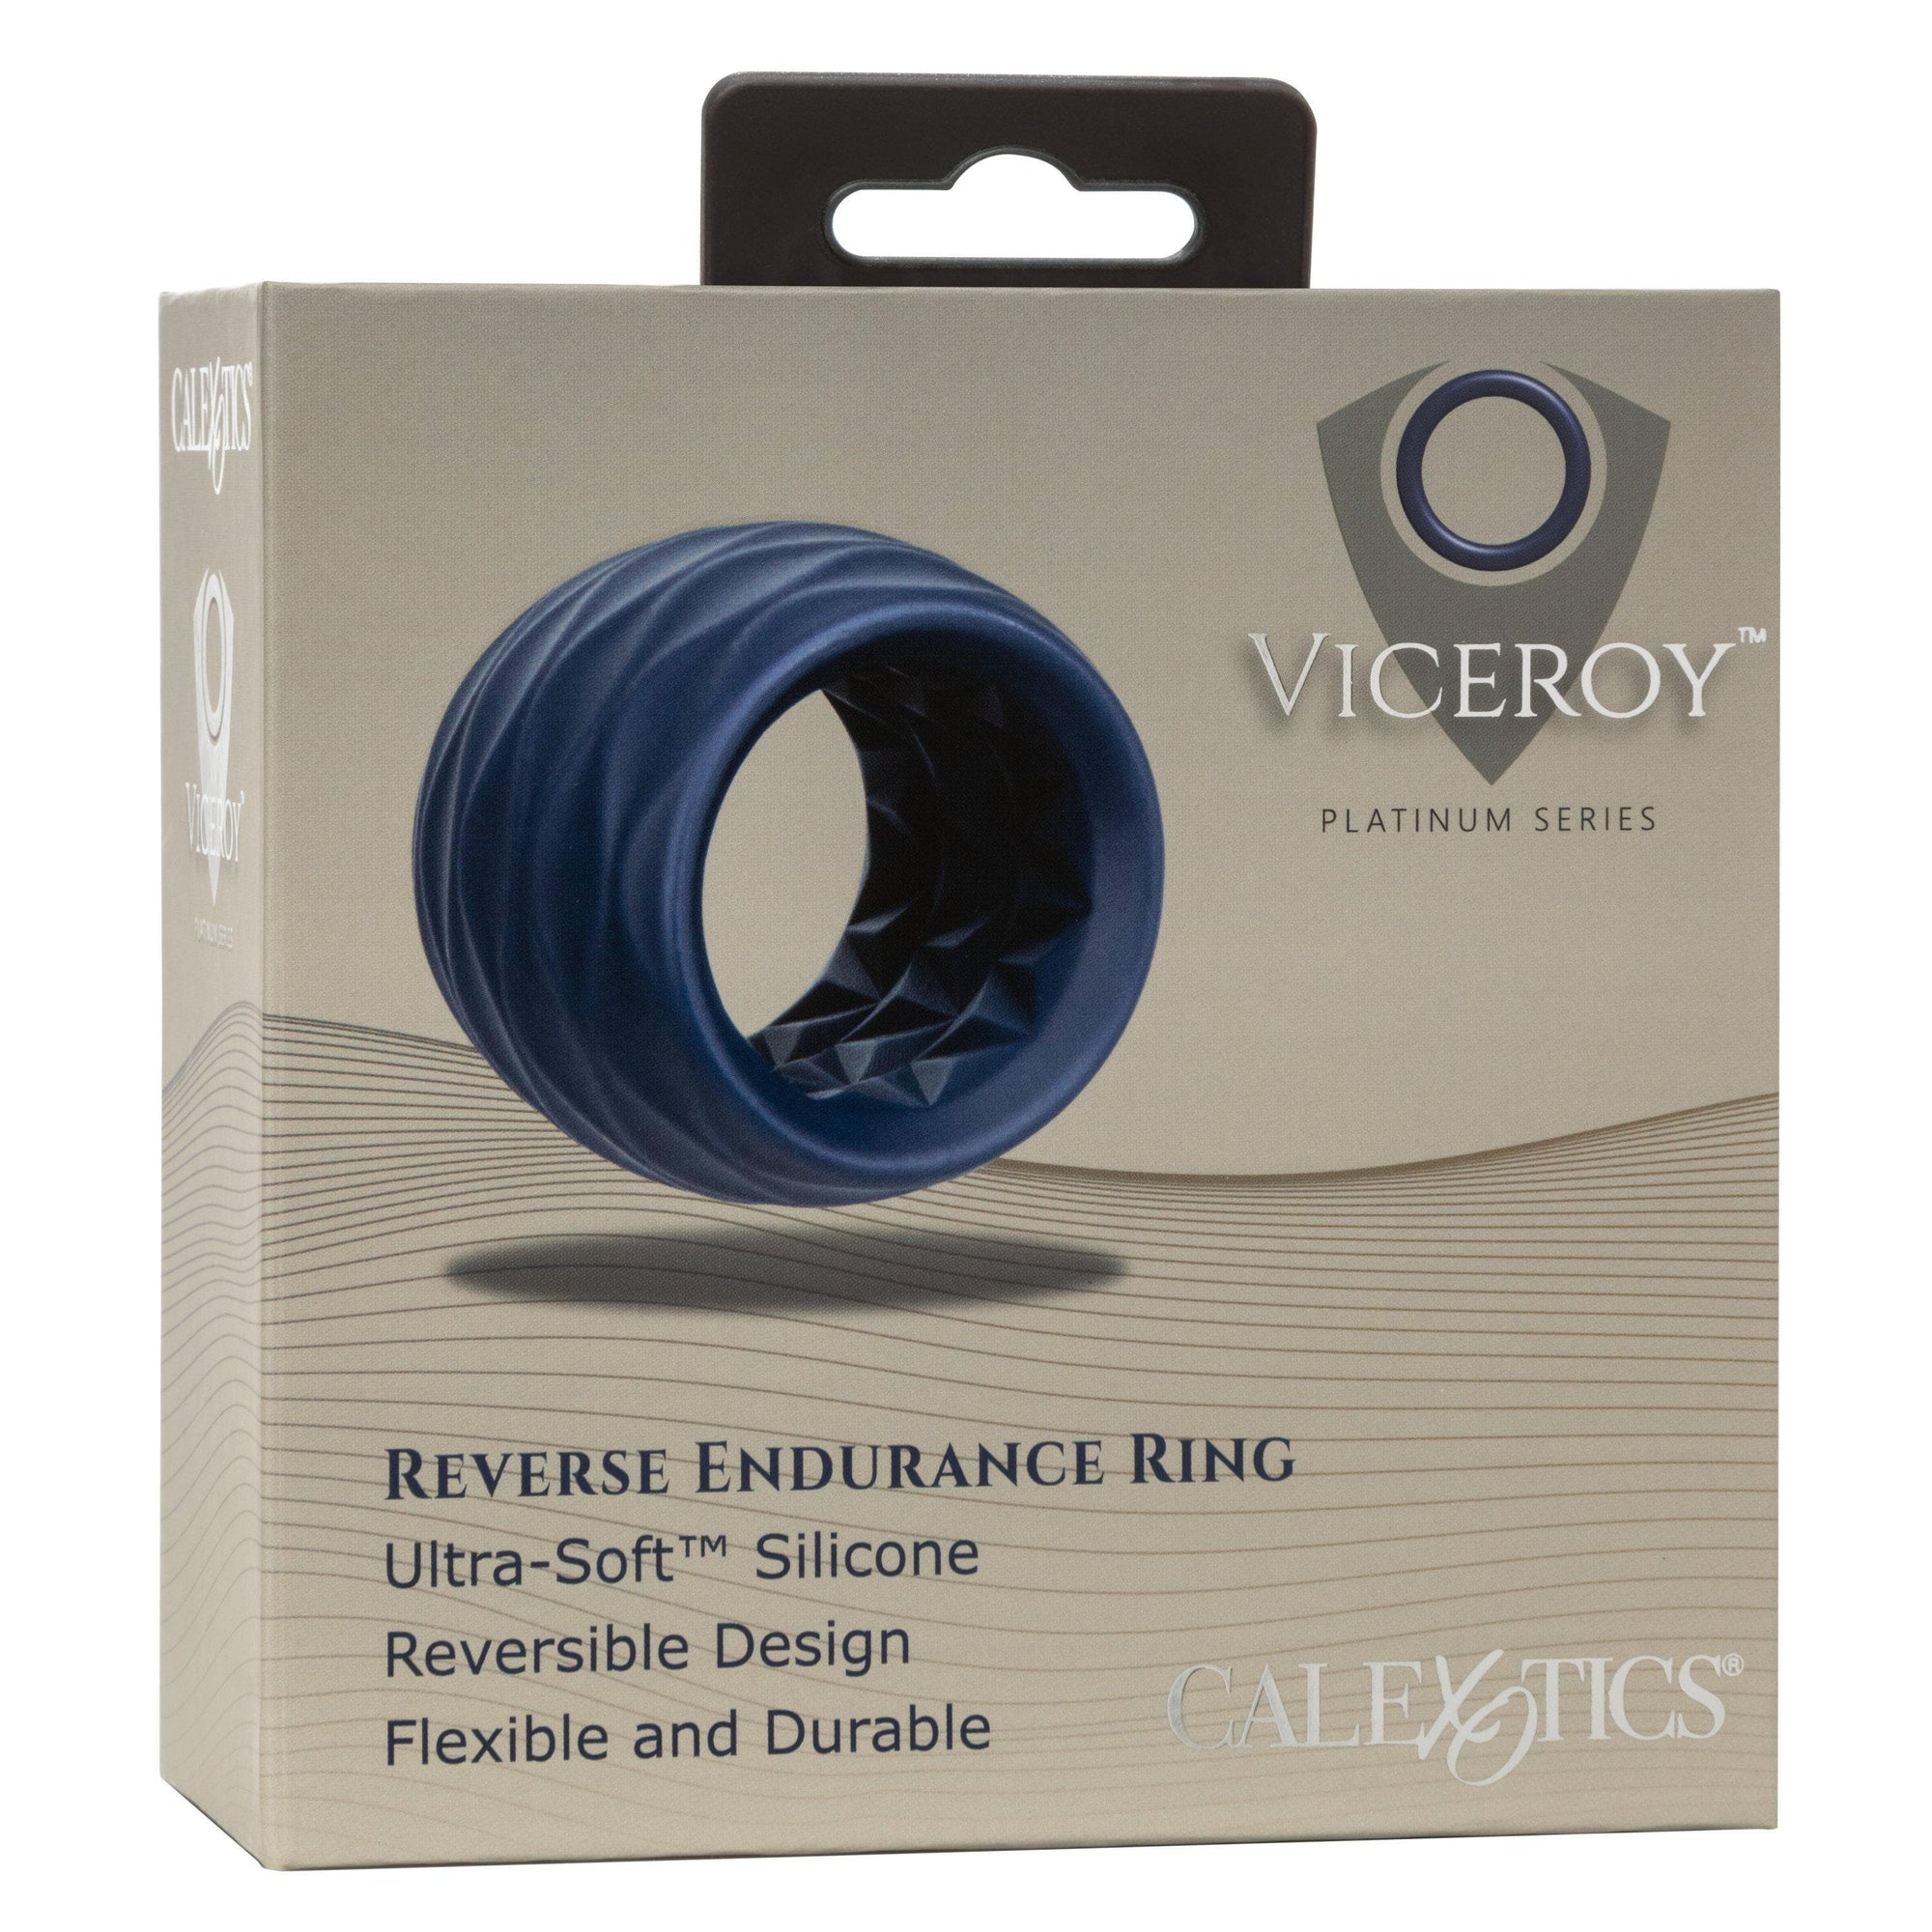 Viceroy Reverse Endurance Ring Silicone Penis Ring - Romantic Blessings